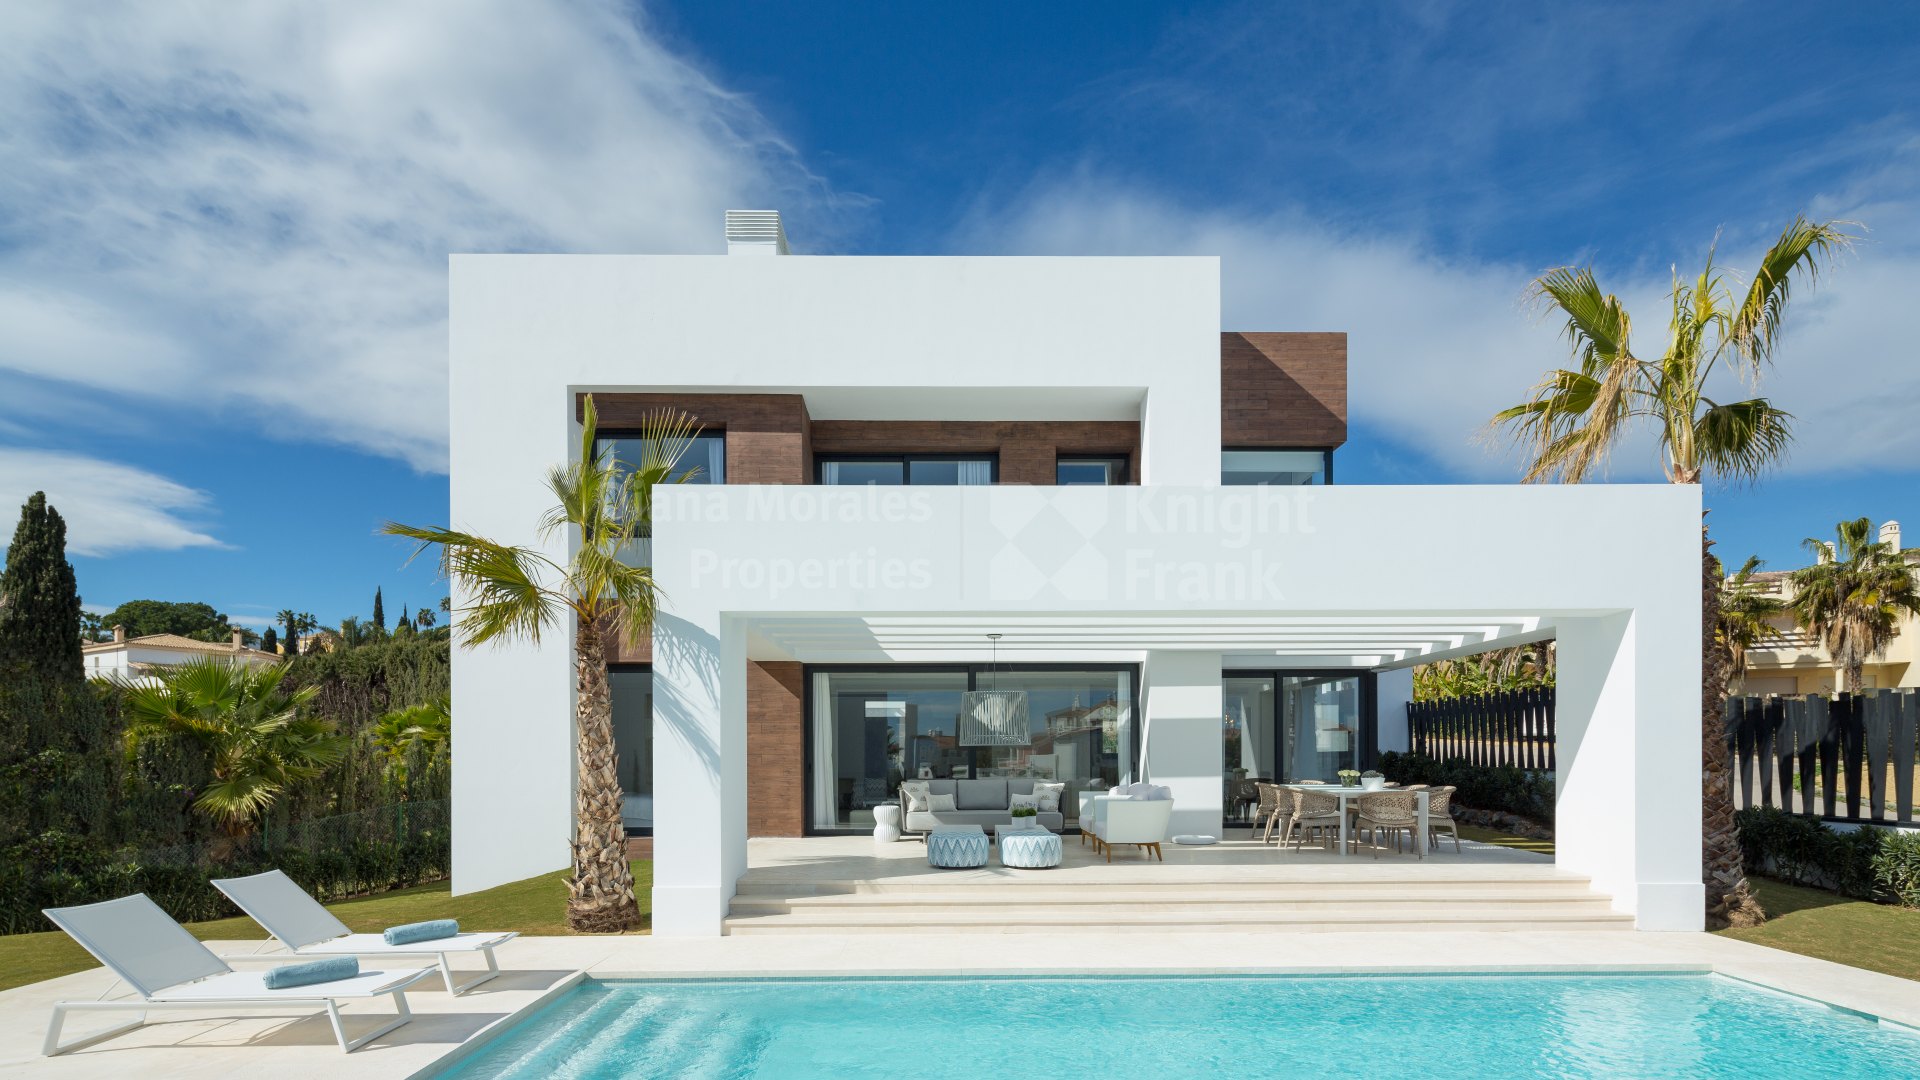 El Paraiso, Luxurious and Modern Residential Compound